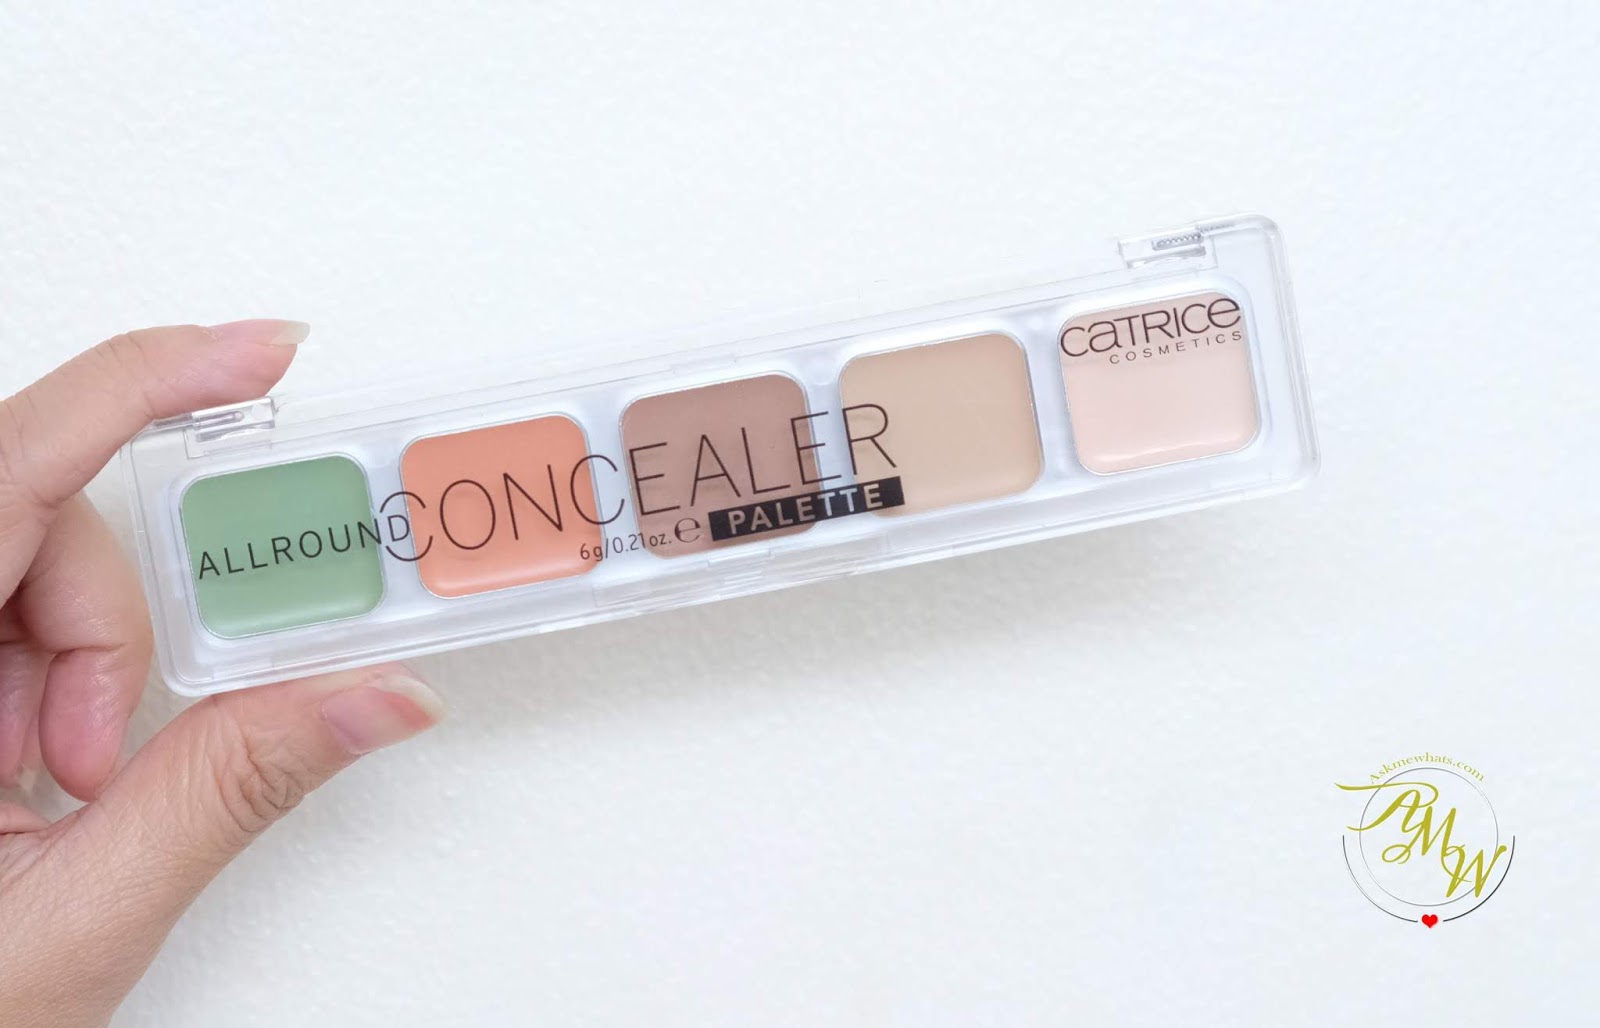 Express Terminal Sorg Askmewhats: All Around Concealer Palette for Daily Use